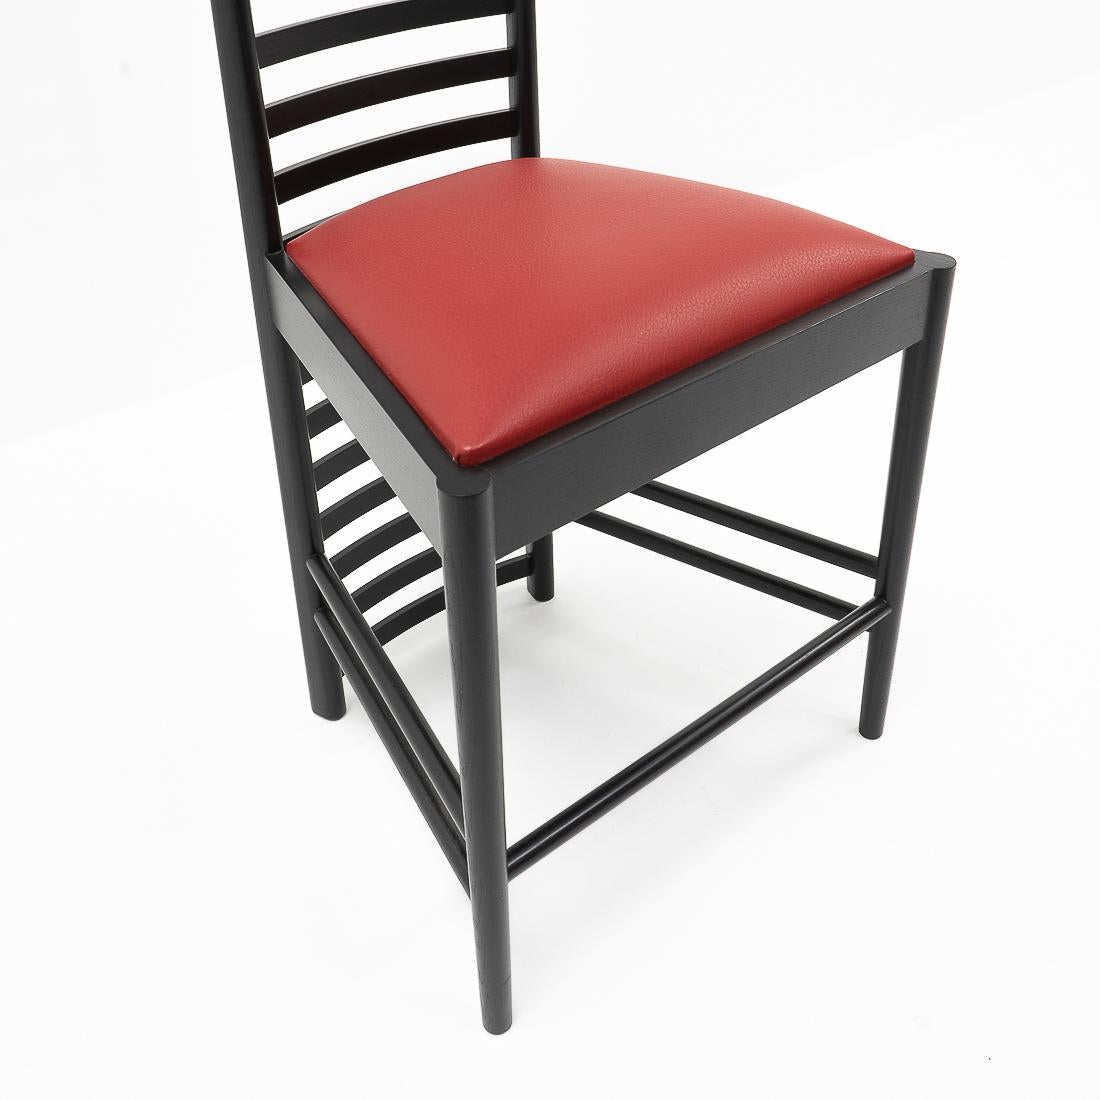 Late 20th Century Classic Modernist Hill House Chair by Charles R. Mackintosh for Cassina, 1980s For Sale